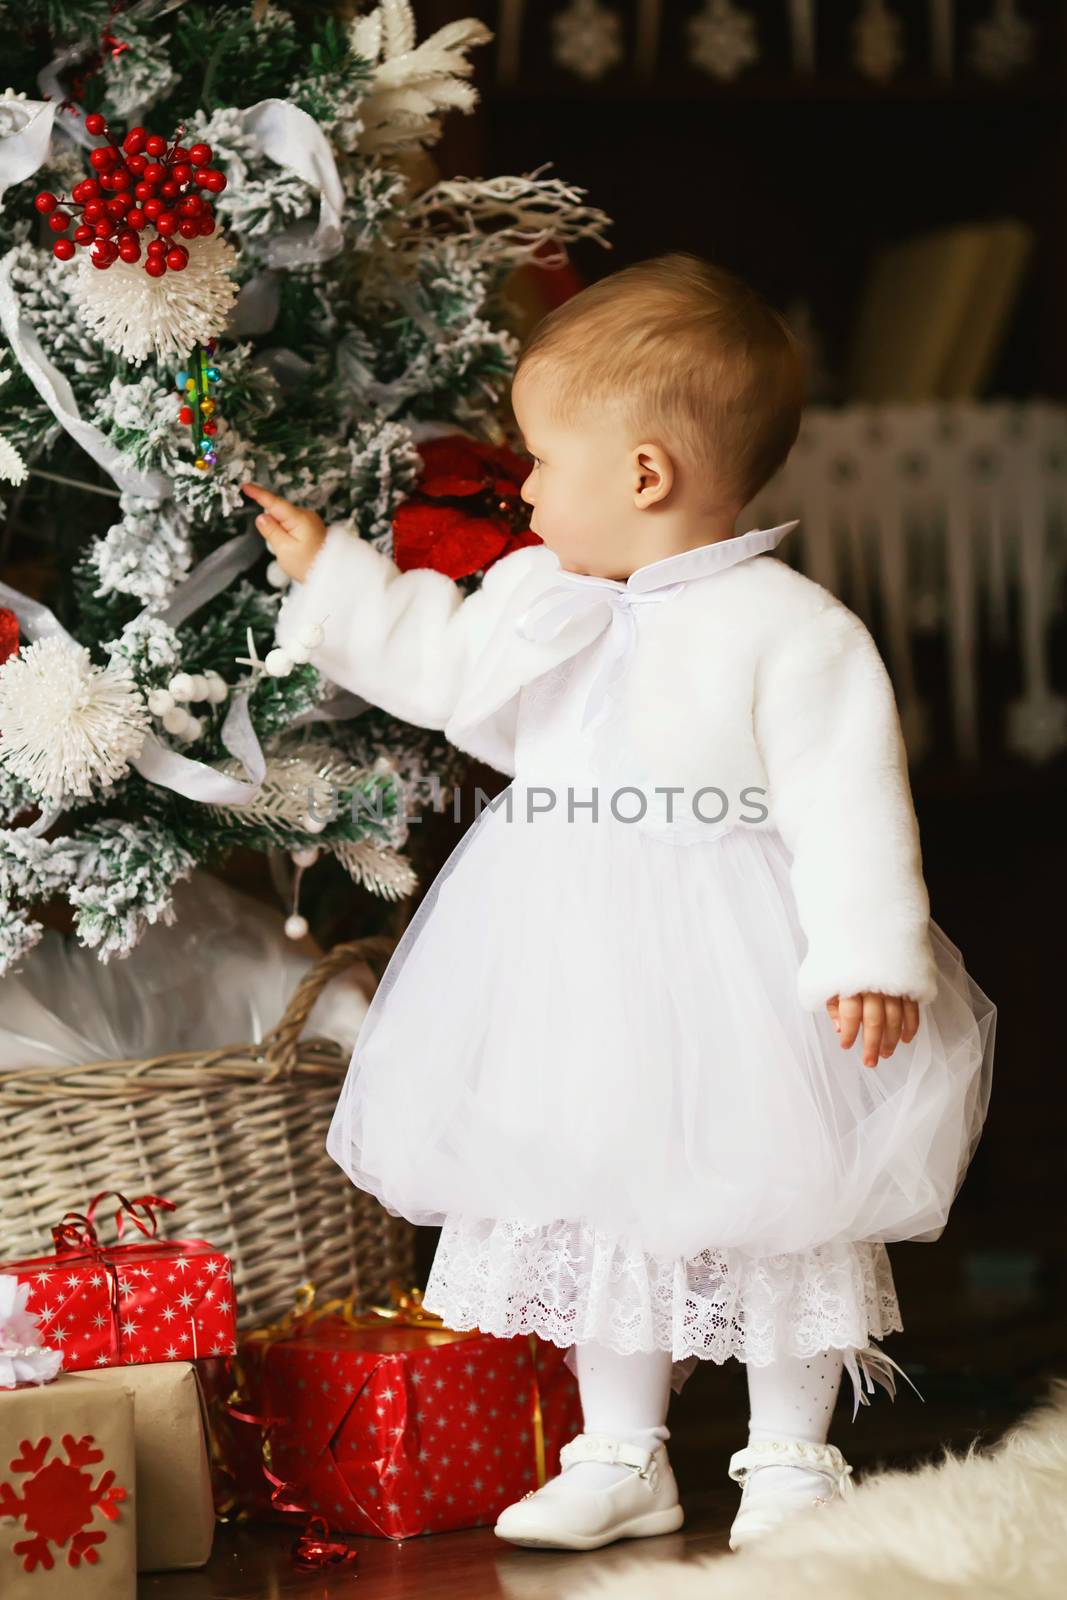 Little baby girl decorates a Christmas tree